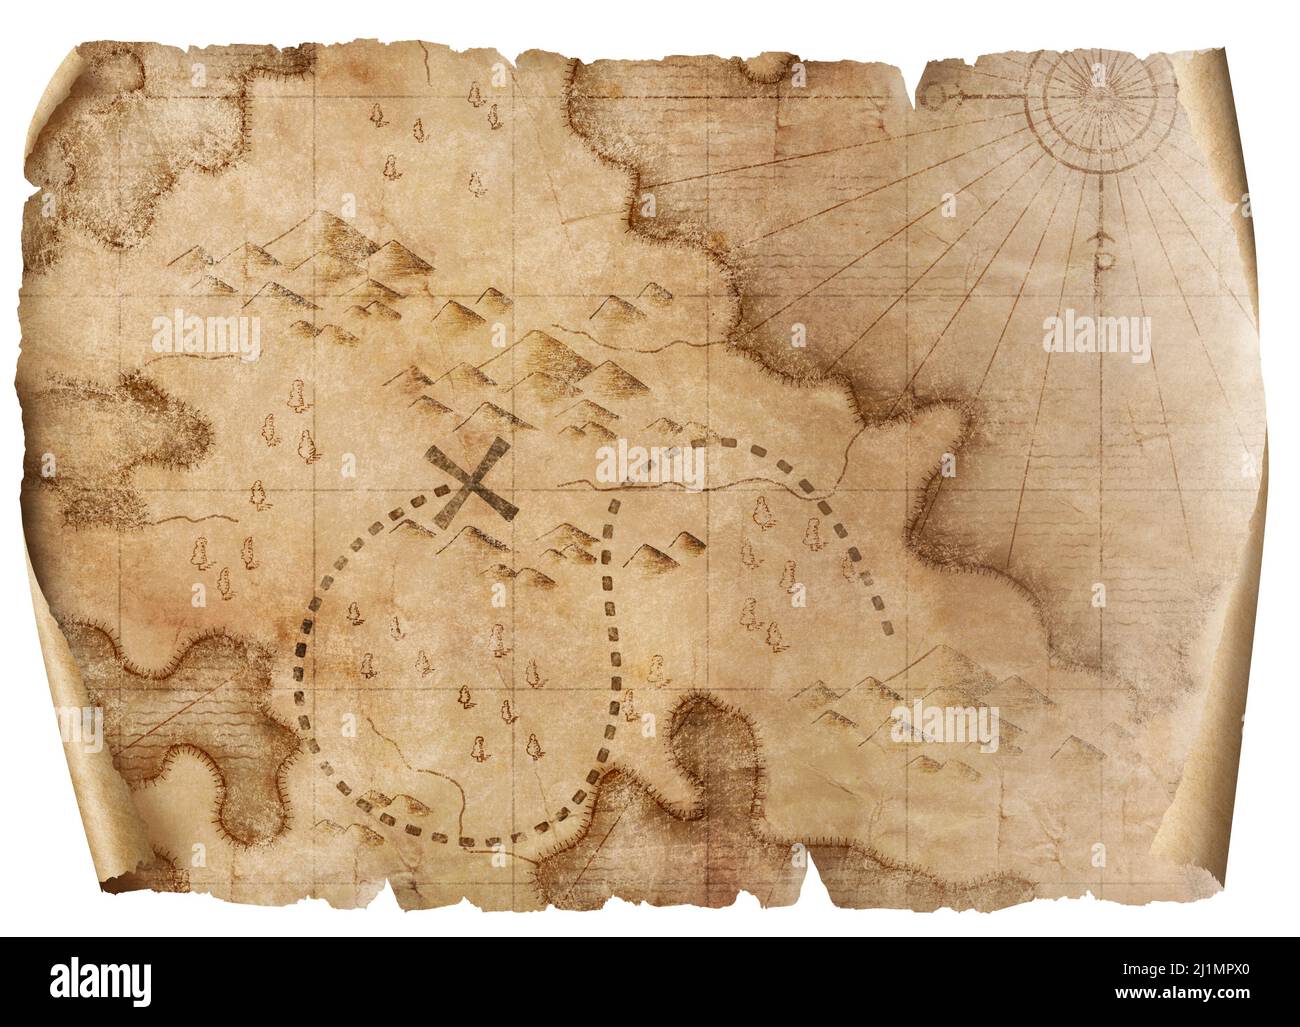 medieval pirates map with hidden treasures mark scroll isolated Stock Photo